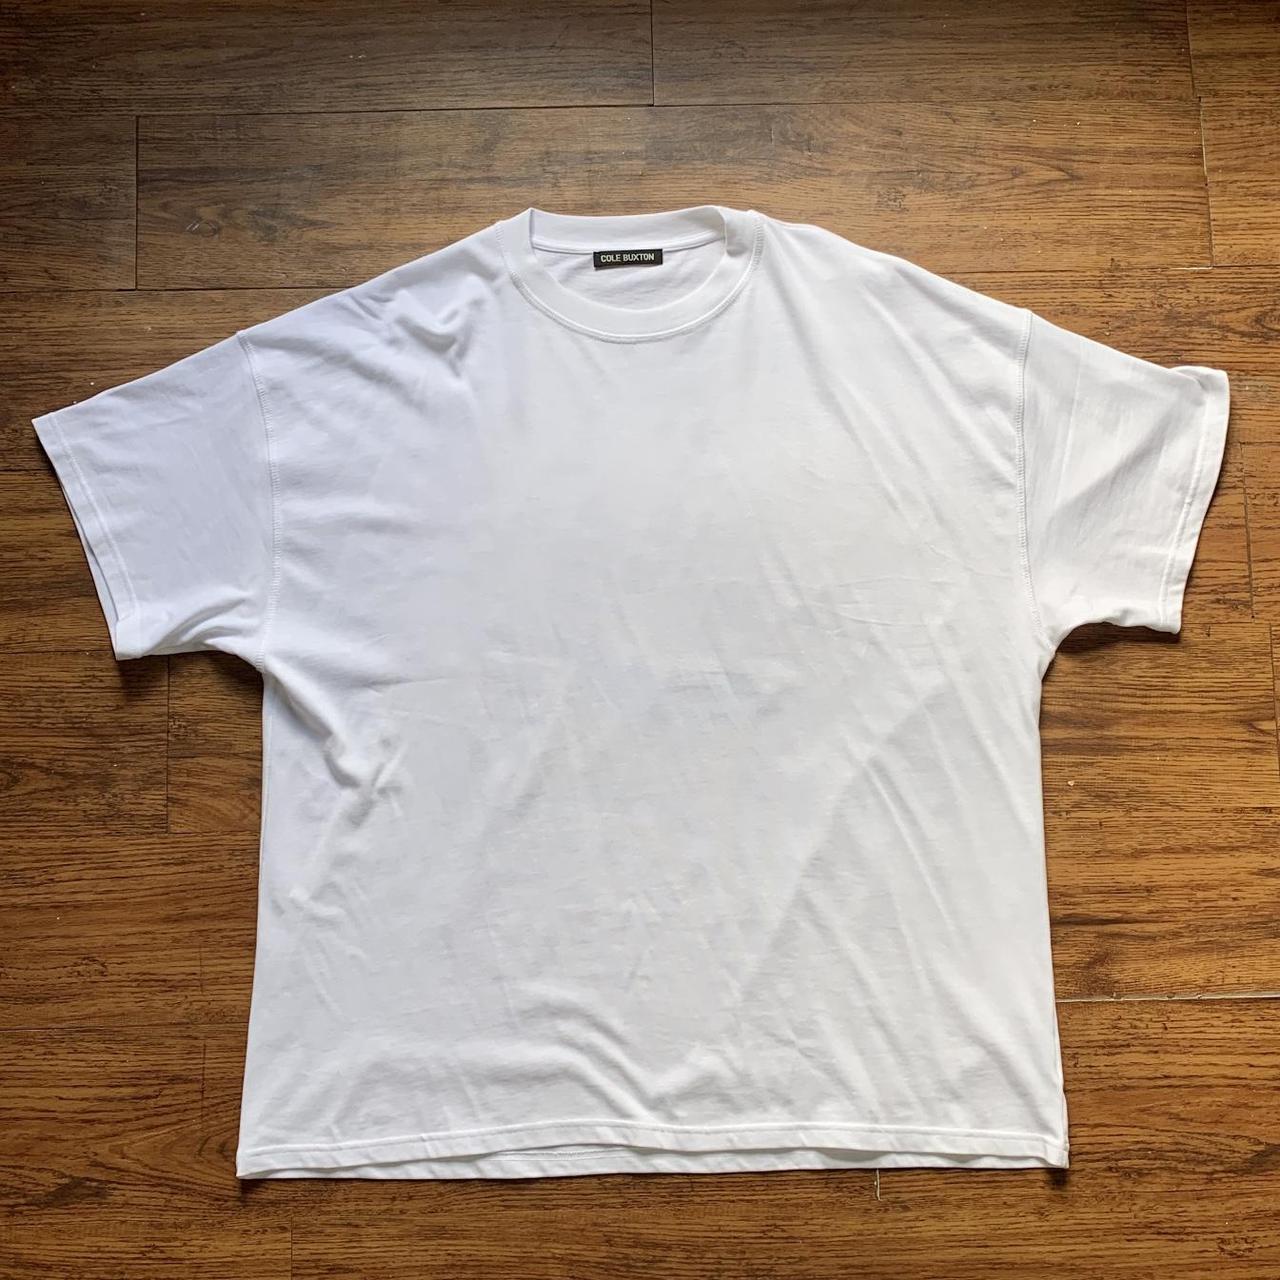 Cole Buxton Fight Camp Tee In white, featuring all... - Depop